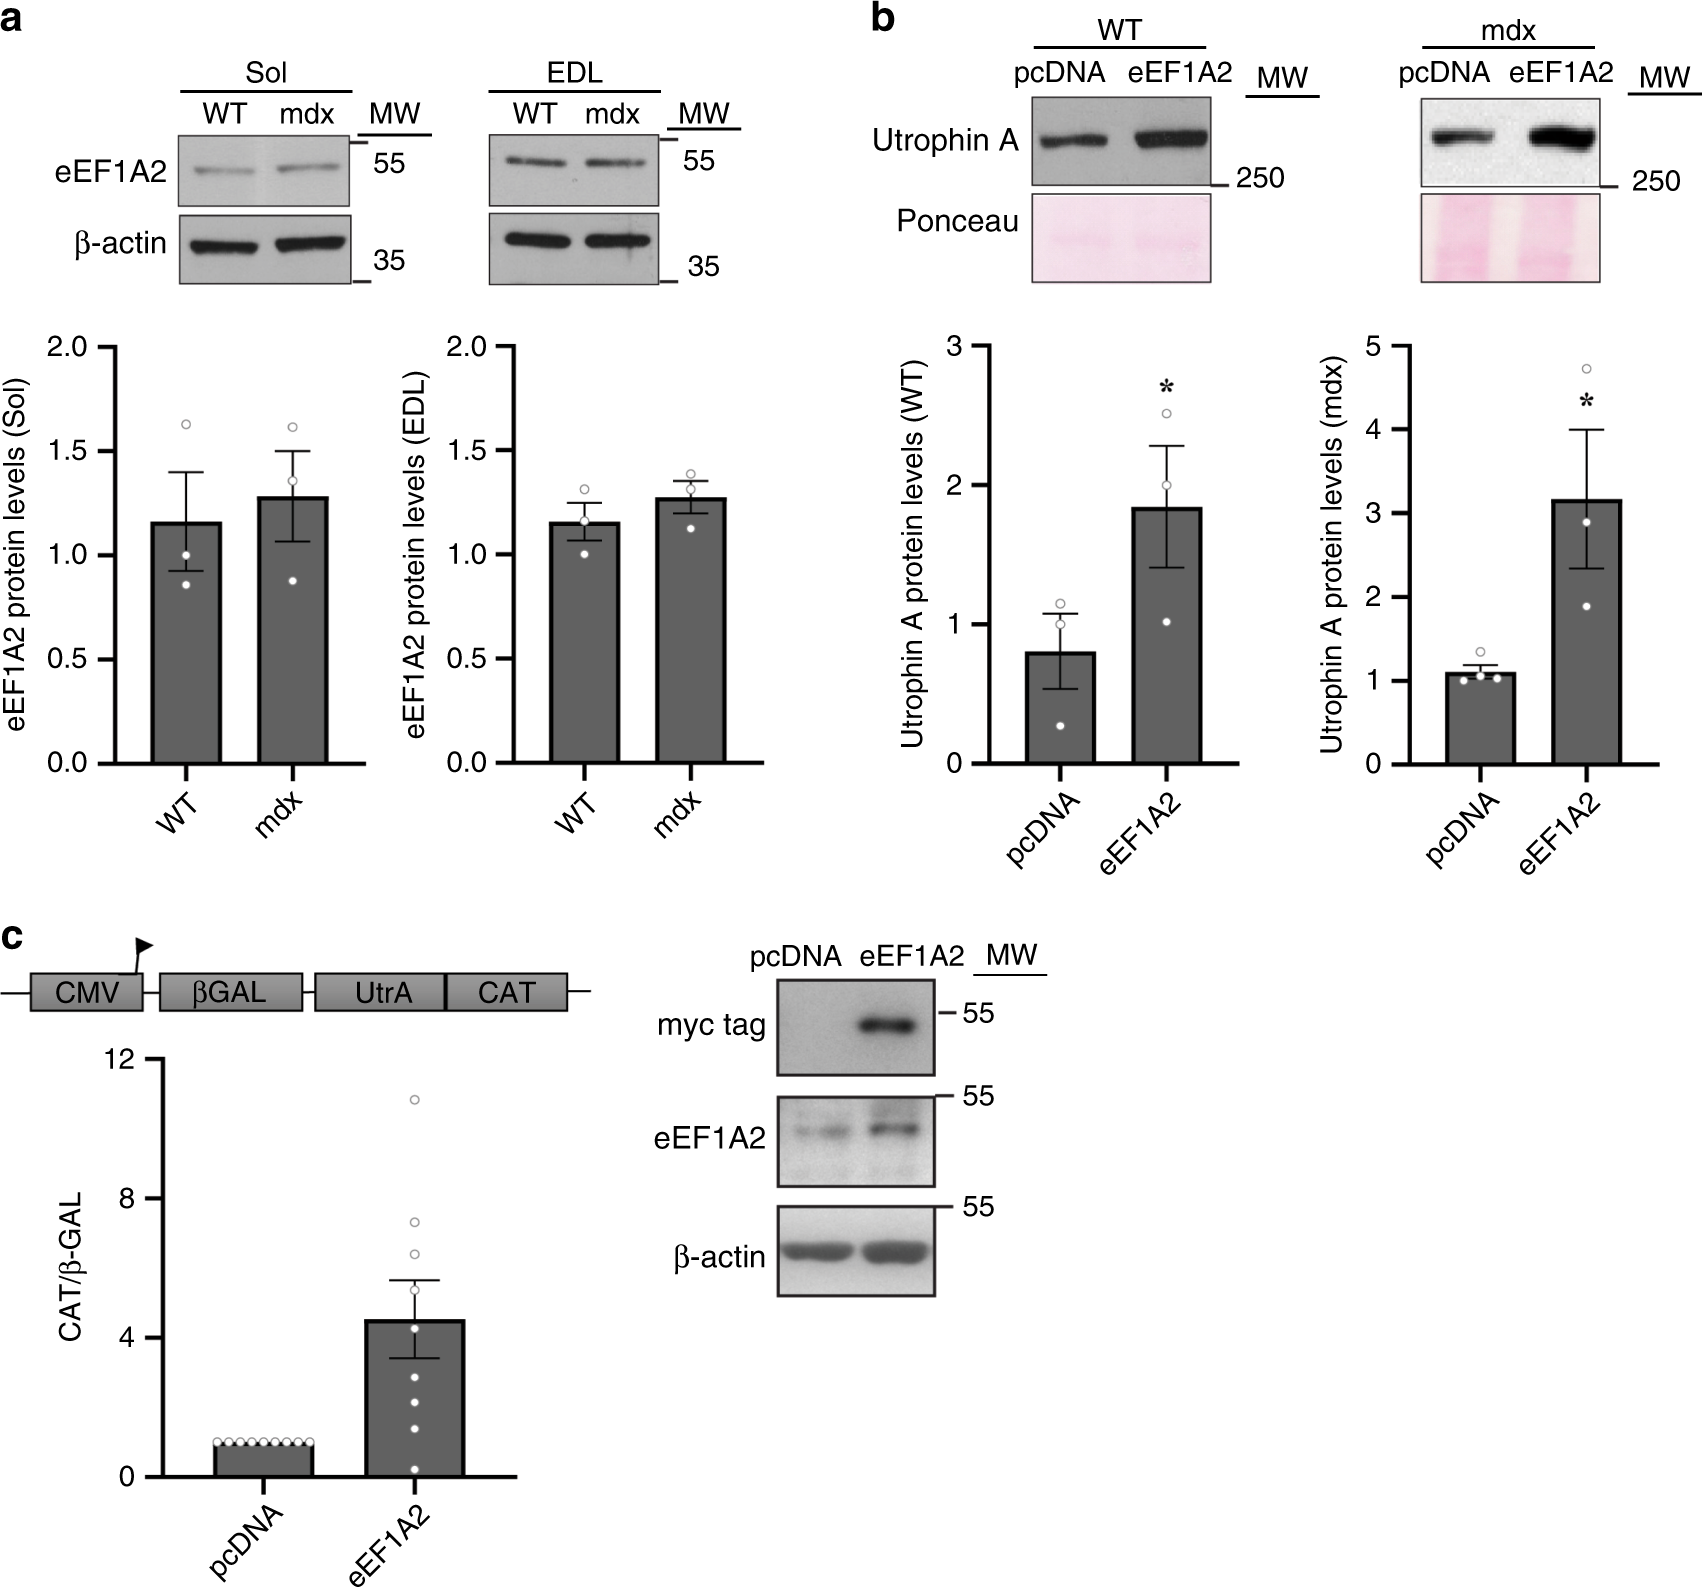 Identification of therapeutics that target eEF1A2 and upregulate utrophin A  translation in dystrophic muscles | Nature Communications